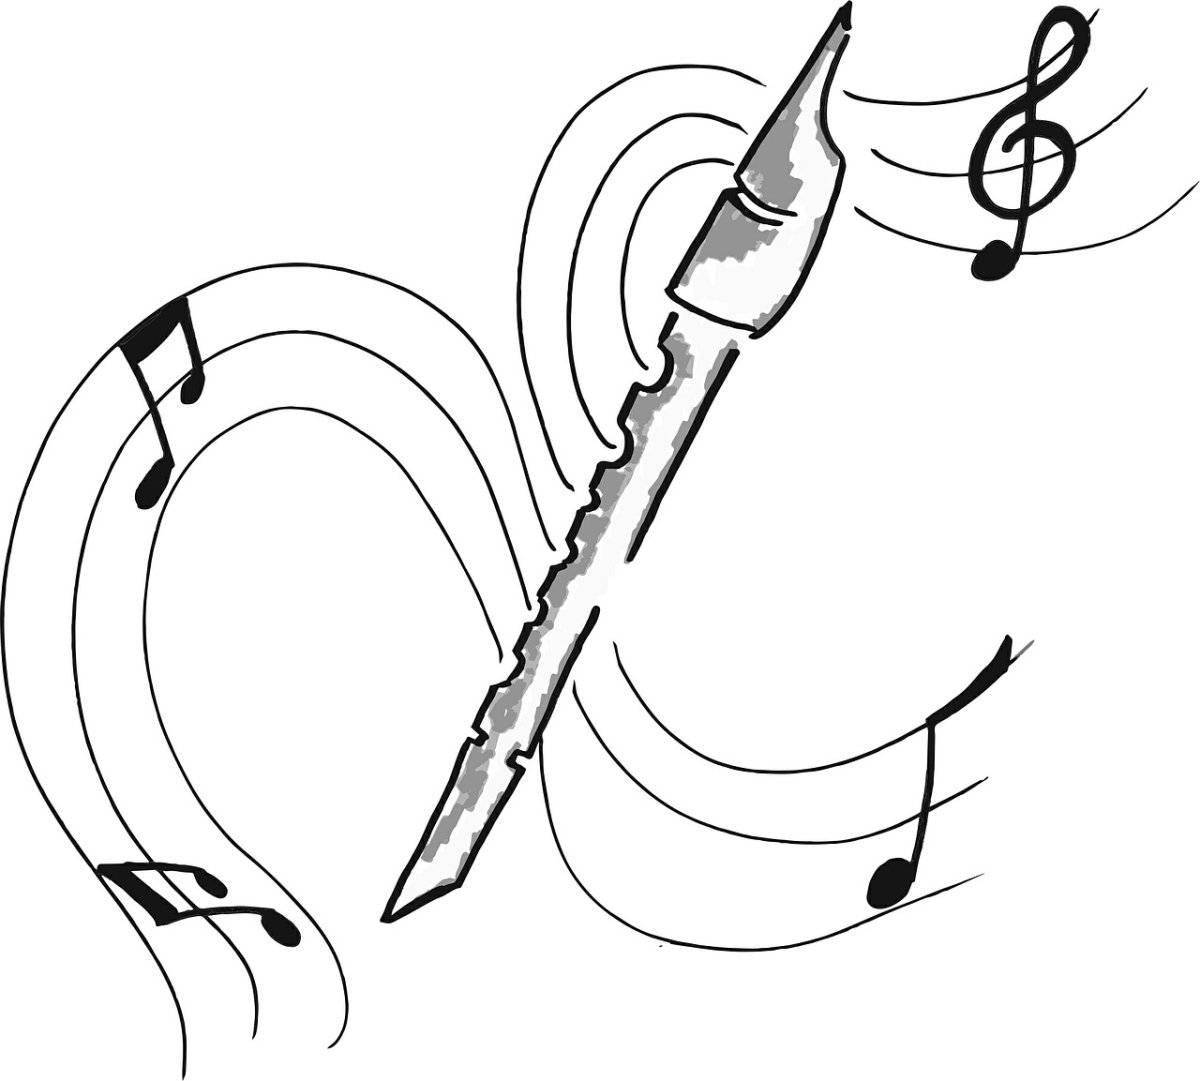 Colourful flute coloring book for kids